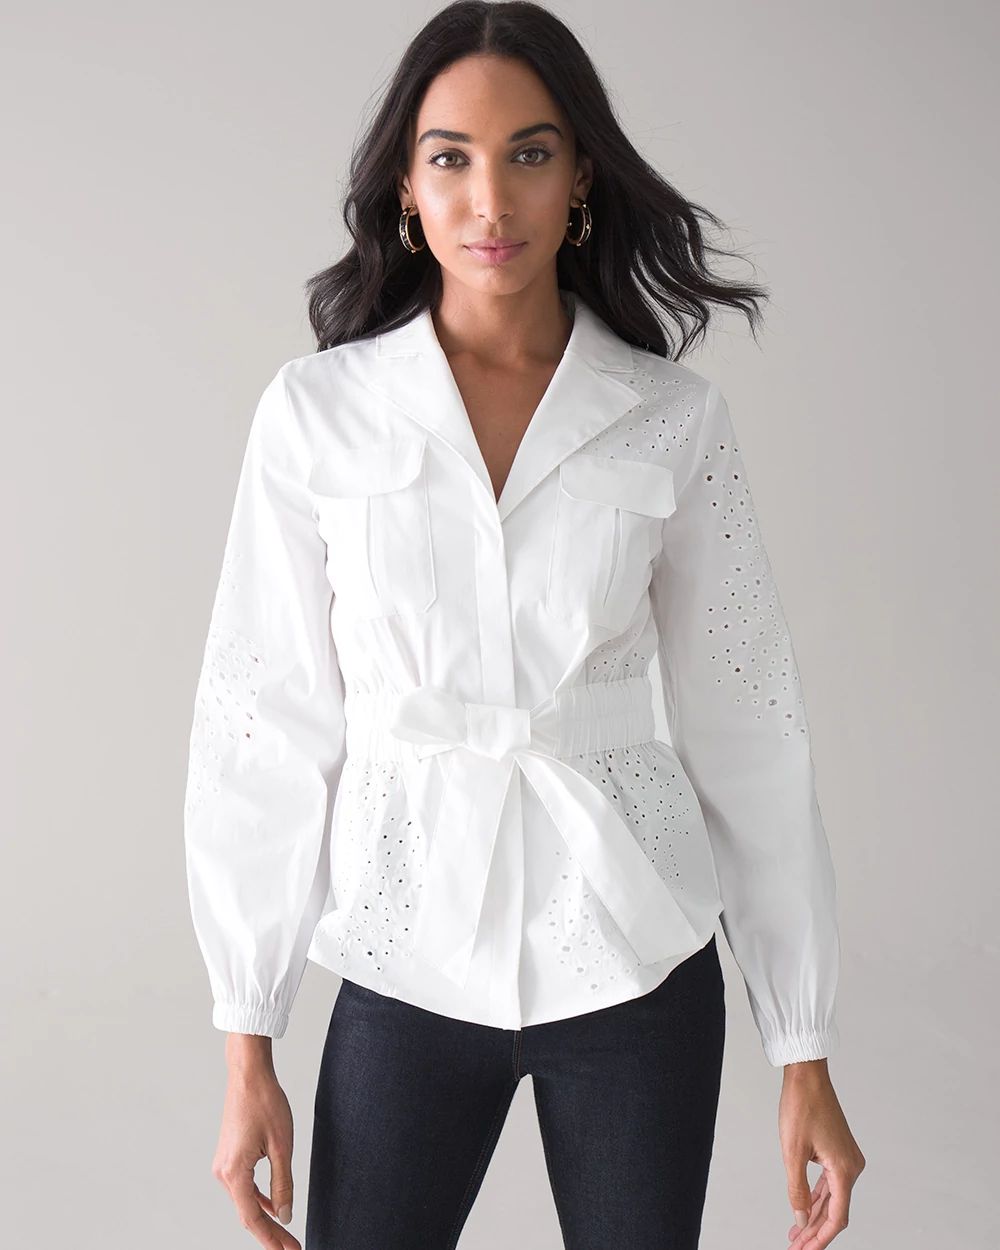 Petite Tie-Waist Embroidered Poplin Shirt click to view larger image.